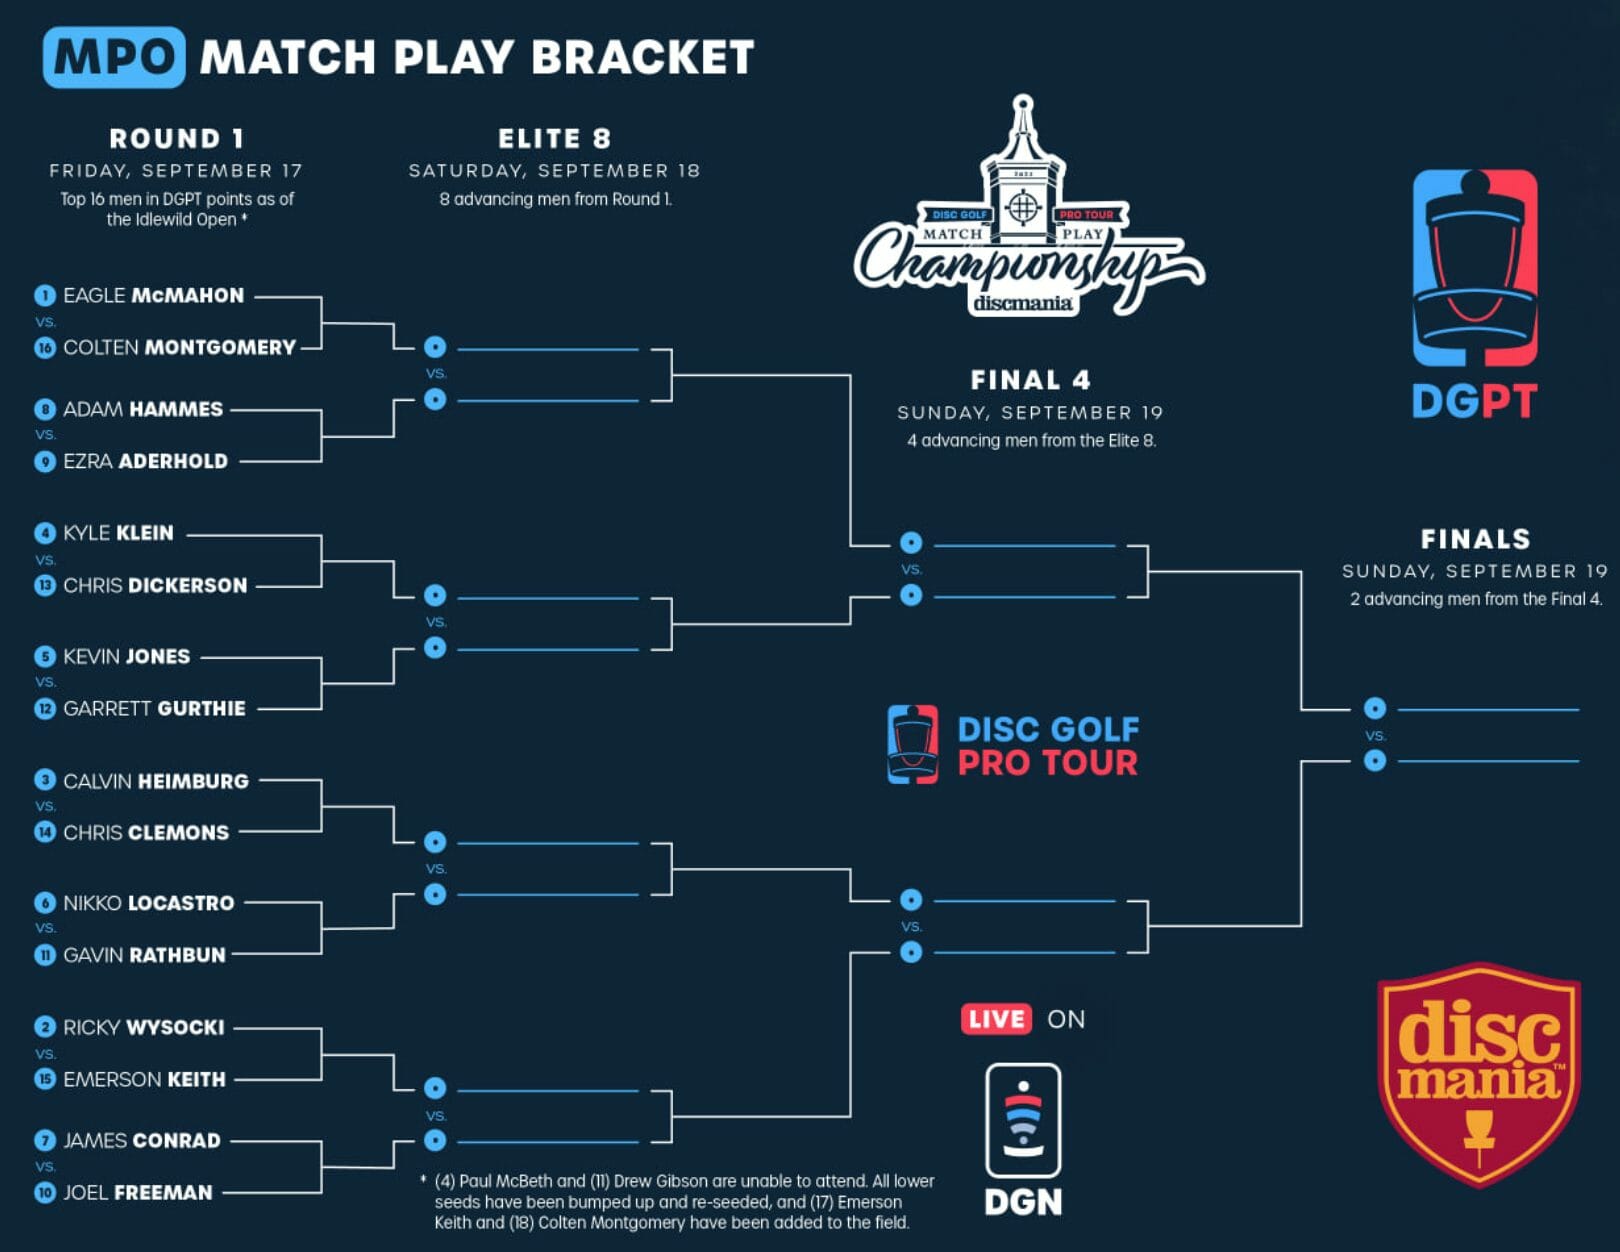 Here Are The Brackets for the DGPT Match Play Championship Ultiworld